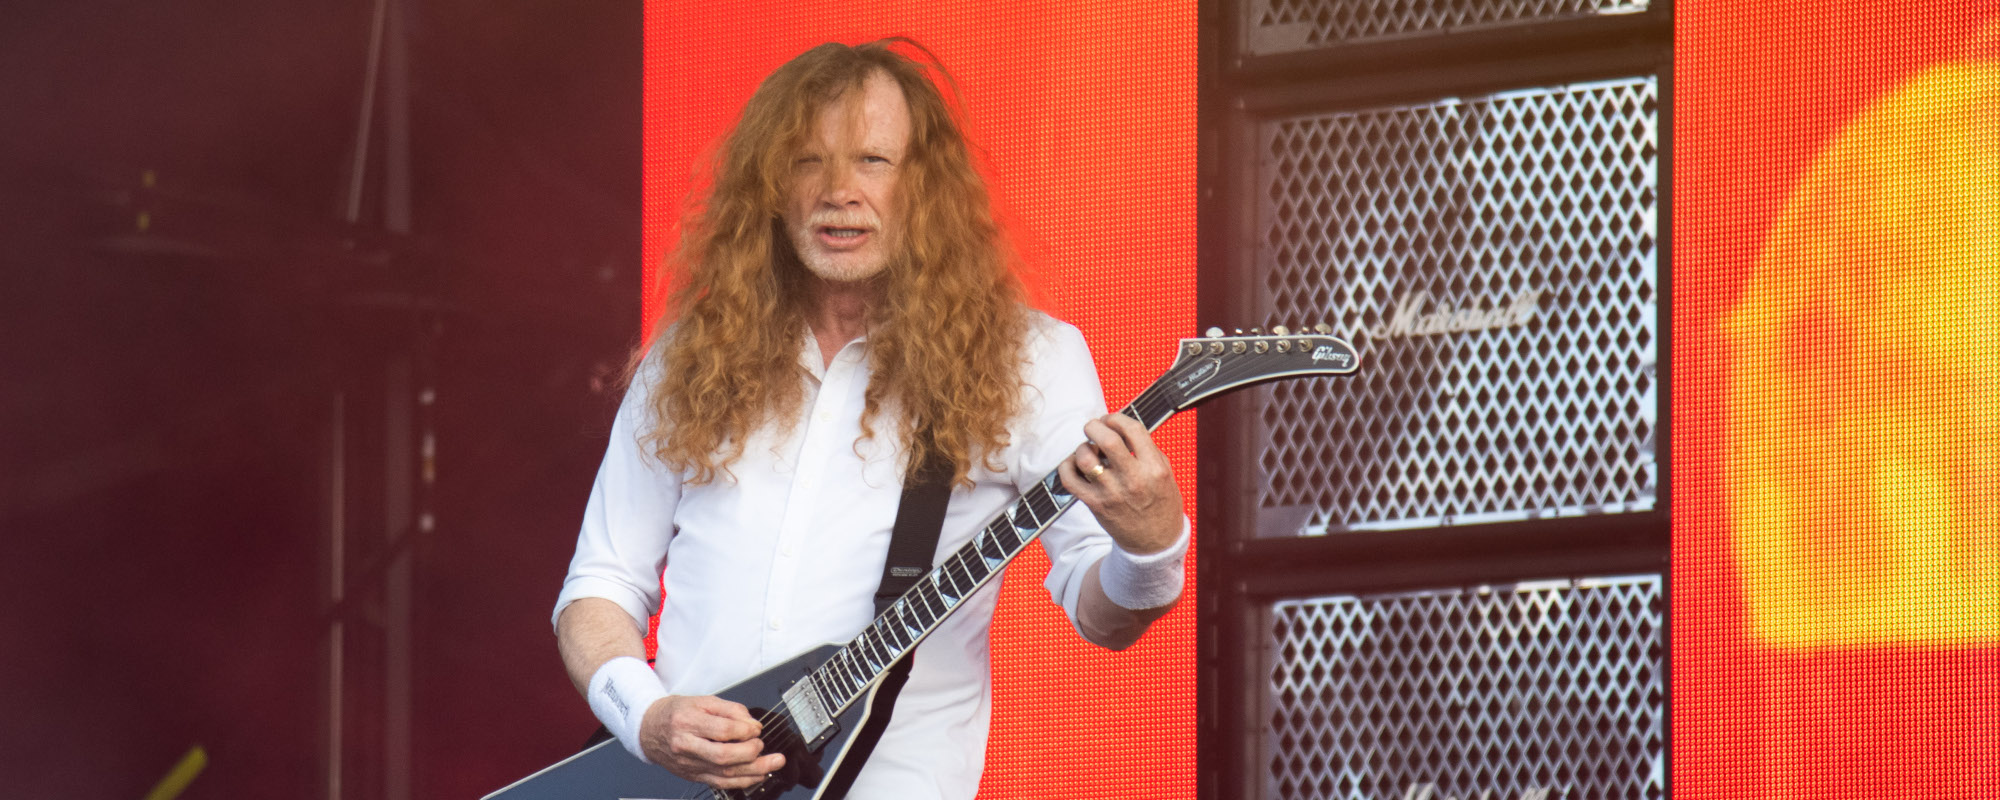 Dave Mustaine Says He’s “Watching the Sun Rise” on Megadeth’s Career